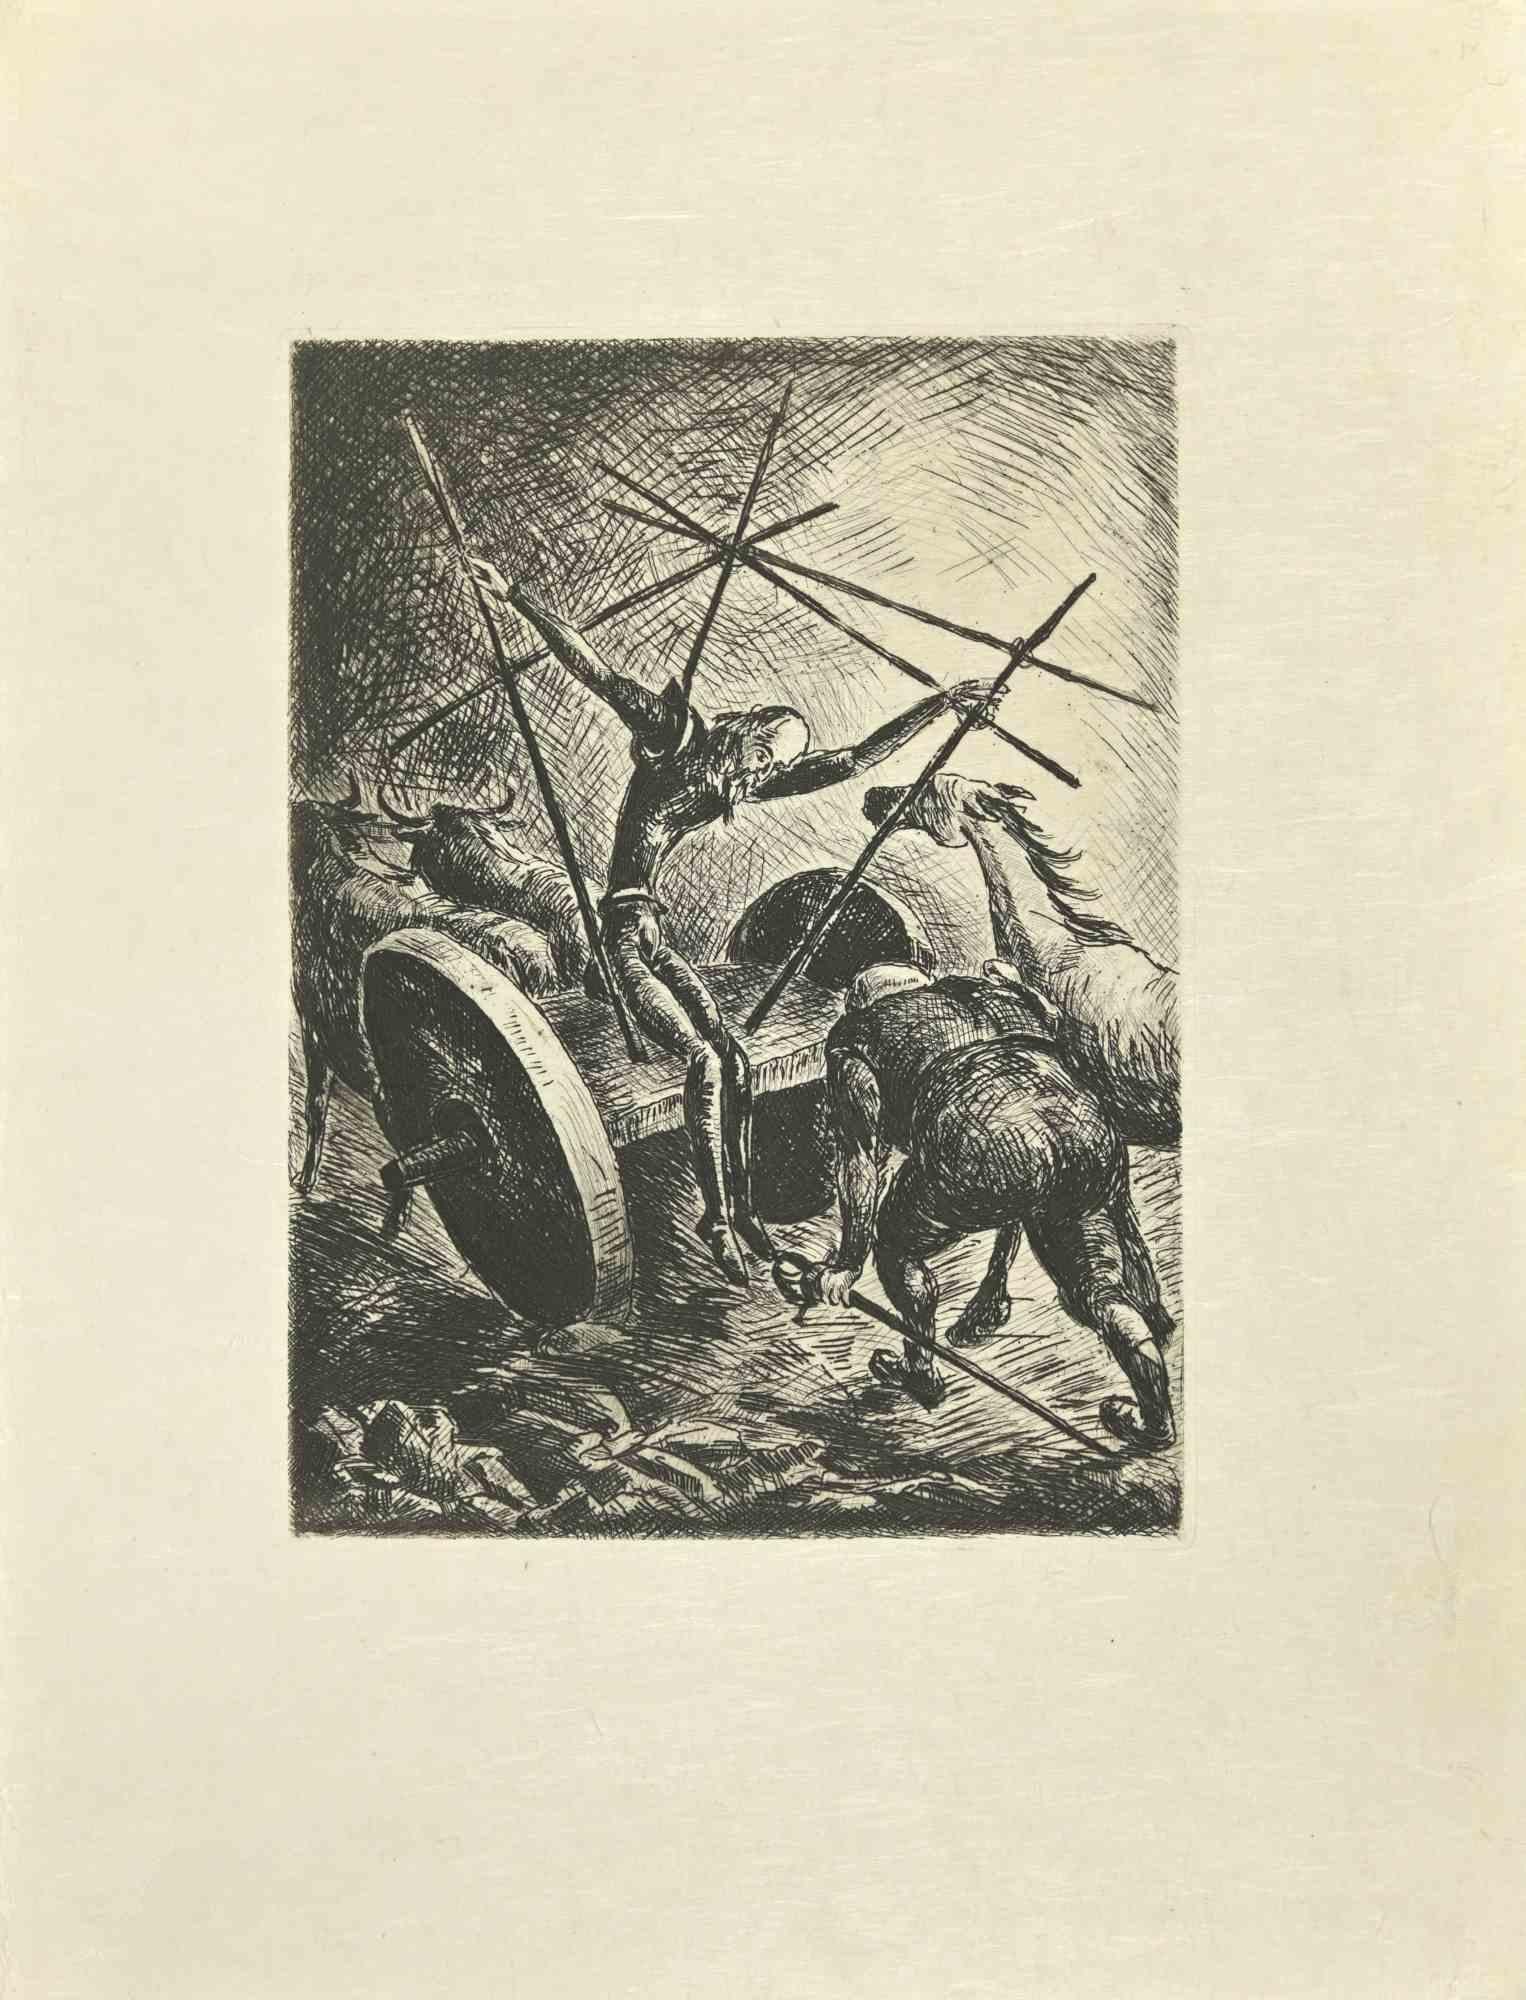 Don Quixote on Chariot is an etching and drypoint print on ivory-colored Japanese paper, realized by Wladyslaw Jahl in 1951.

It belongs to a limited edition of 125 specimens.

Good conditions.

The artwork represents a visual scene from Don Quixote